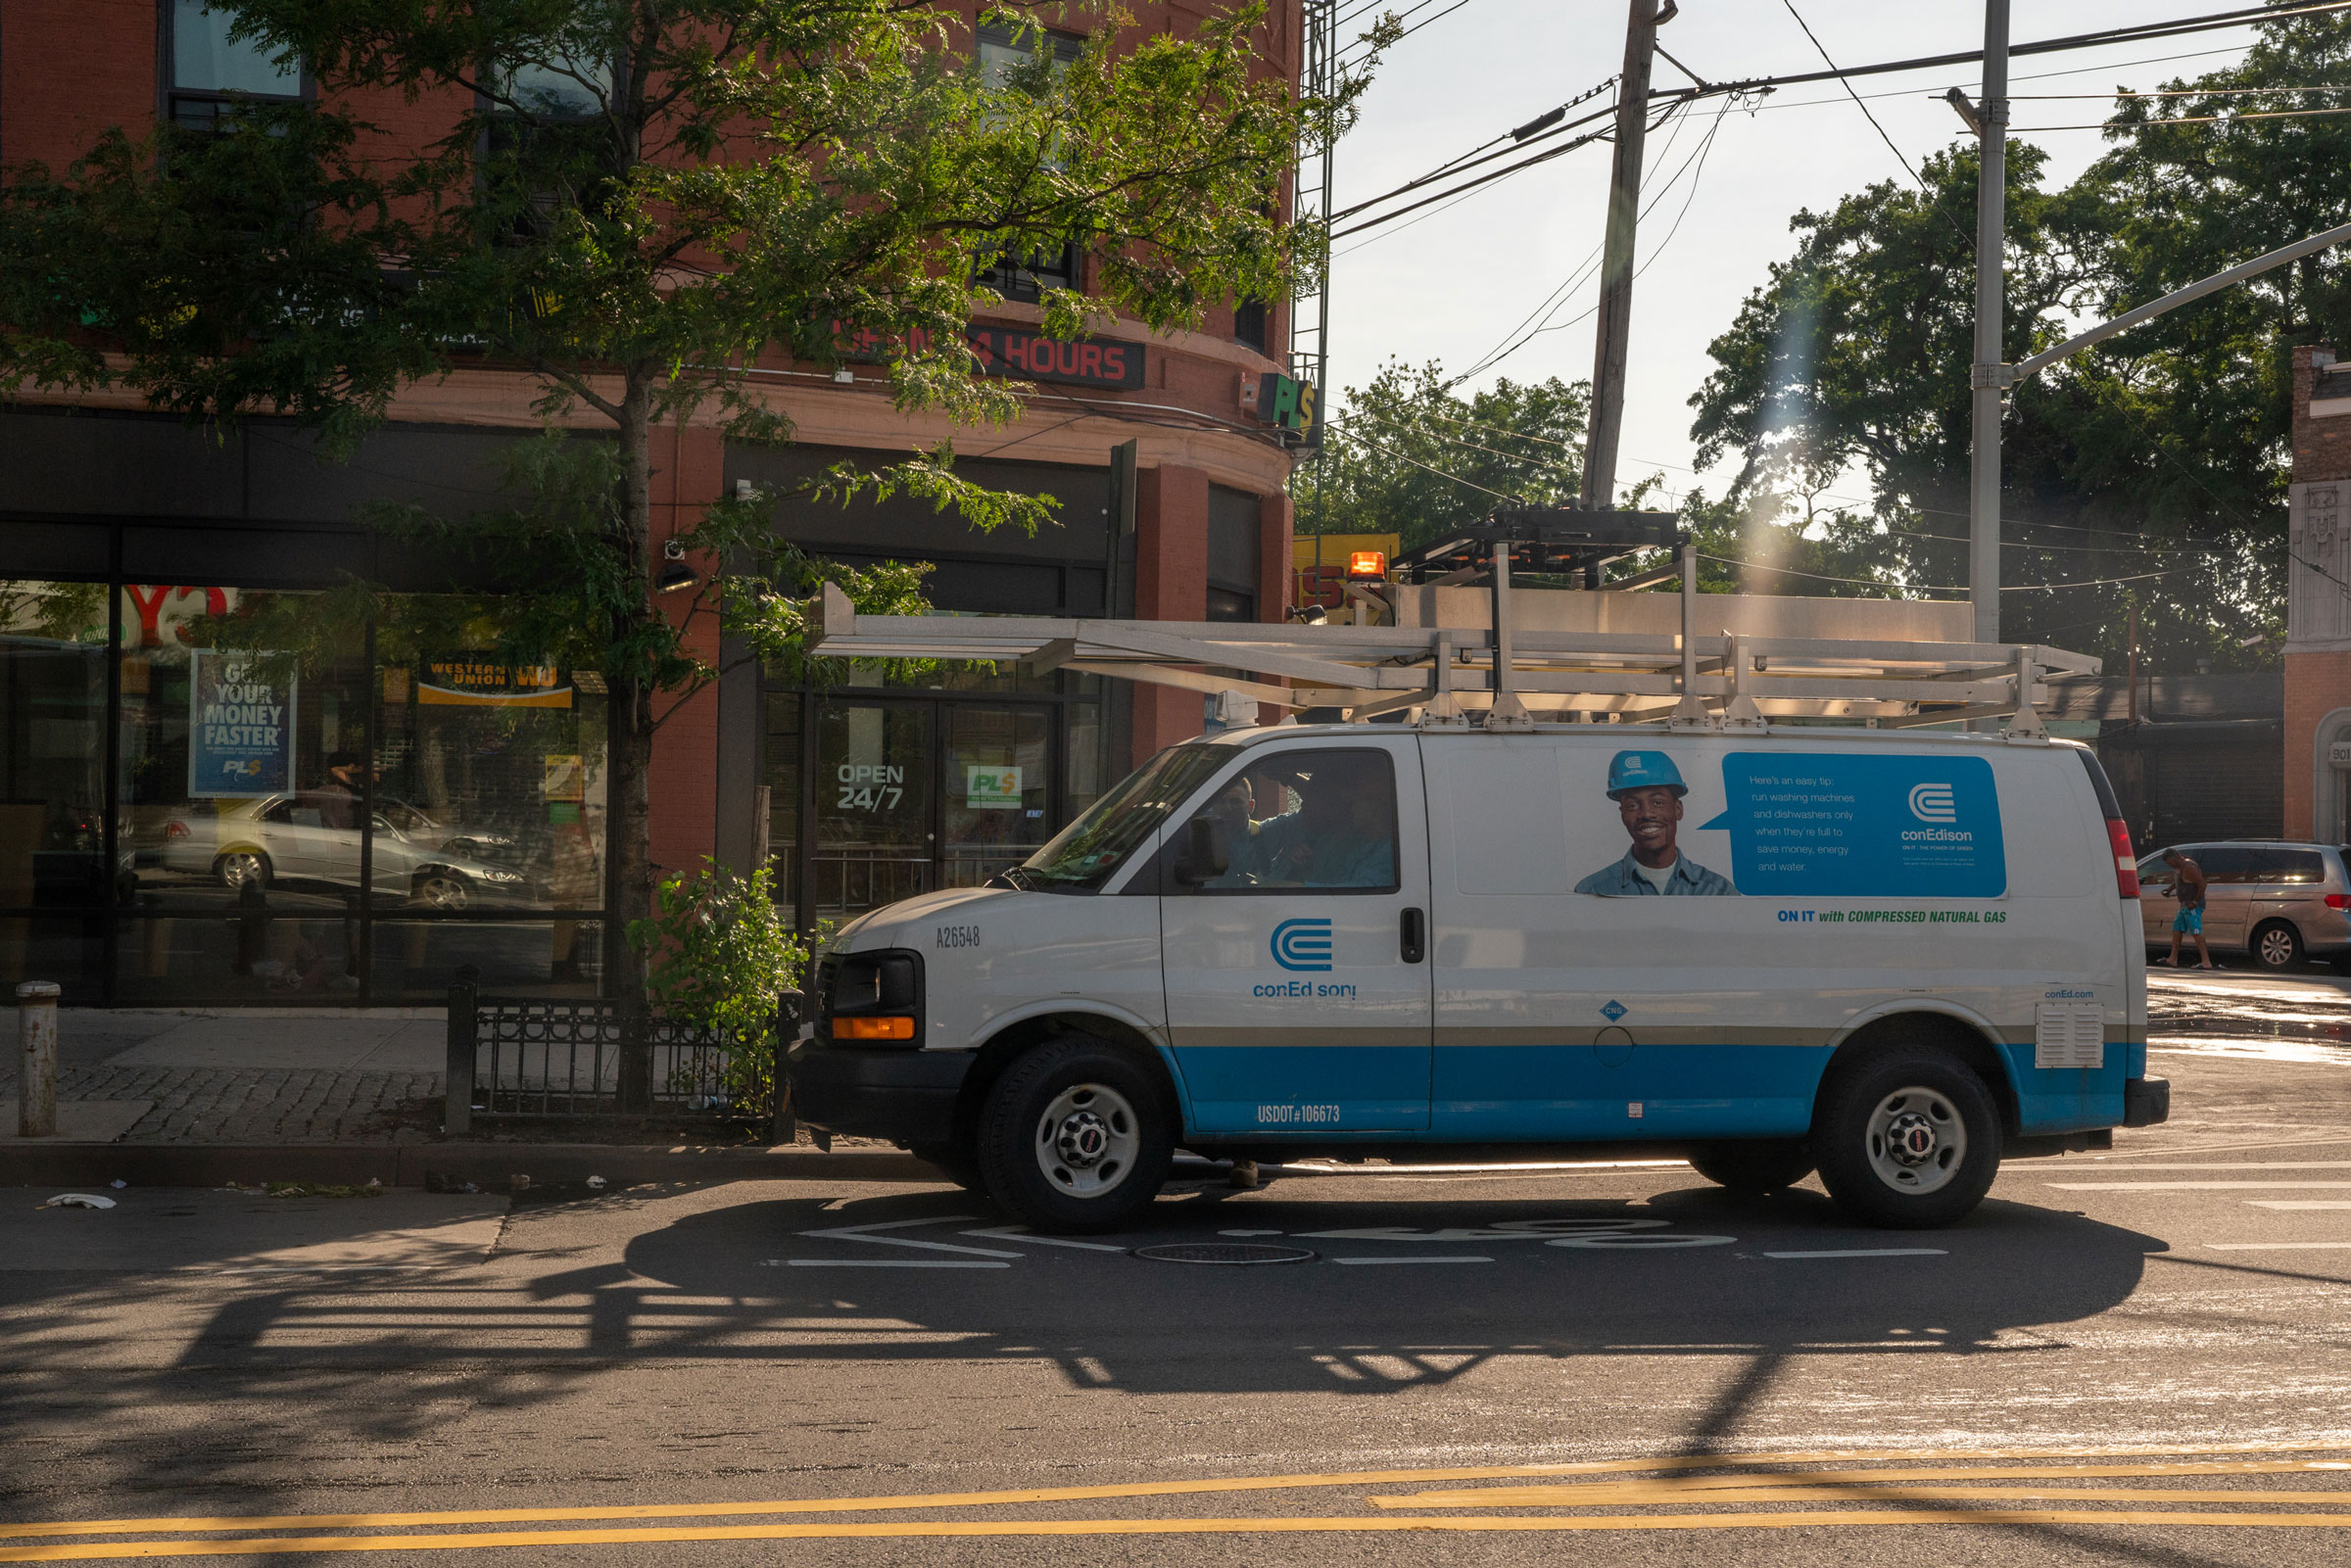 A Consolidated Edison Inc. van sits parked on a street in the Bronx borough of New York, U.S., on Saturday, July 20, 2019. (David 'Dee' Delgado—Bloomberg/Getty Images)